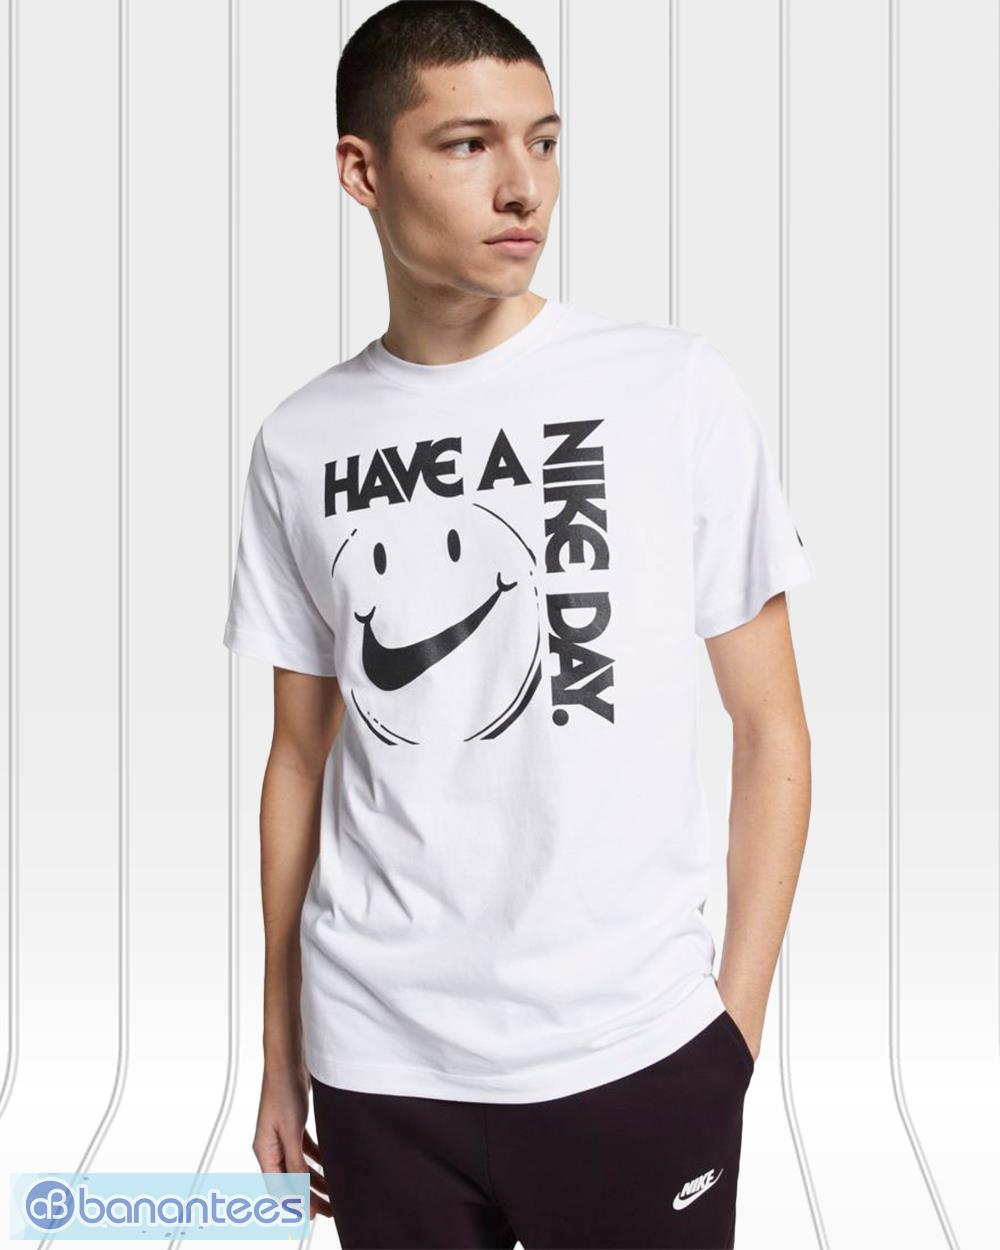 Have a nike day smile T shirts - Banantees